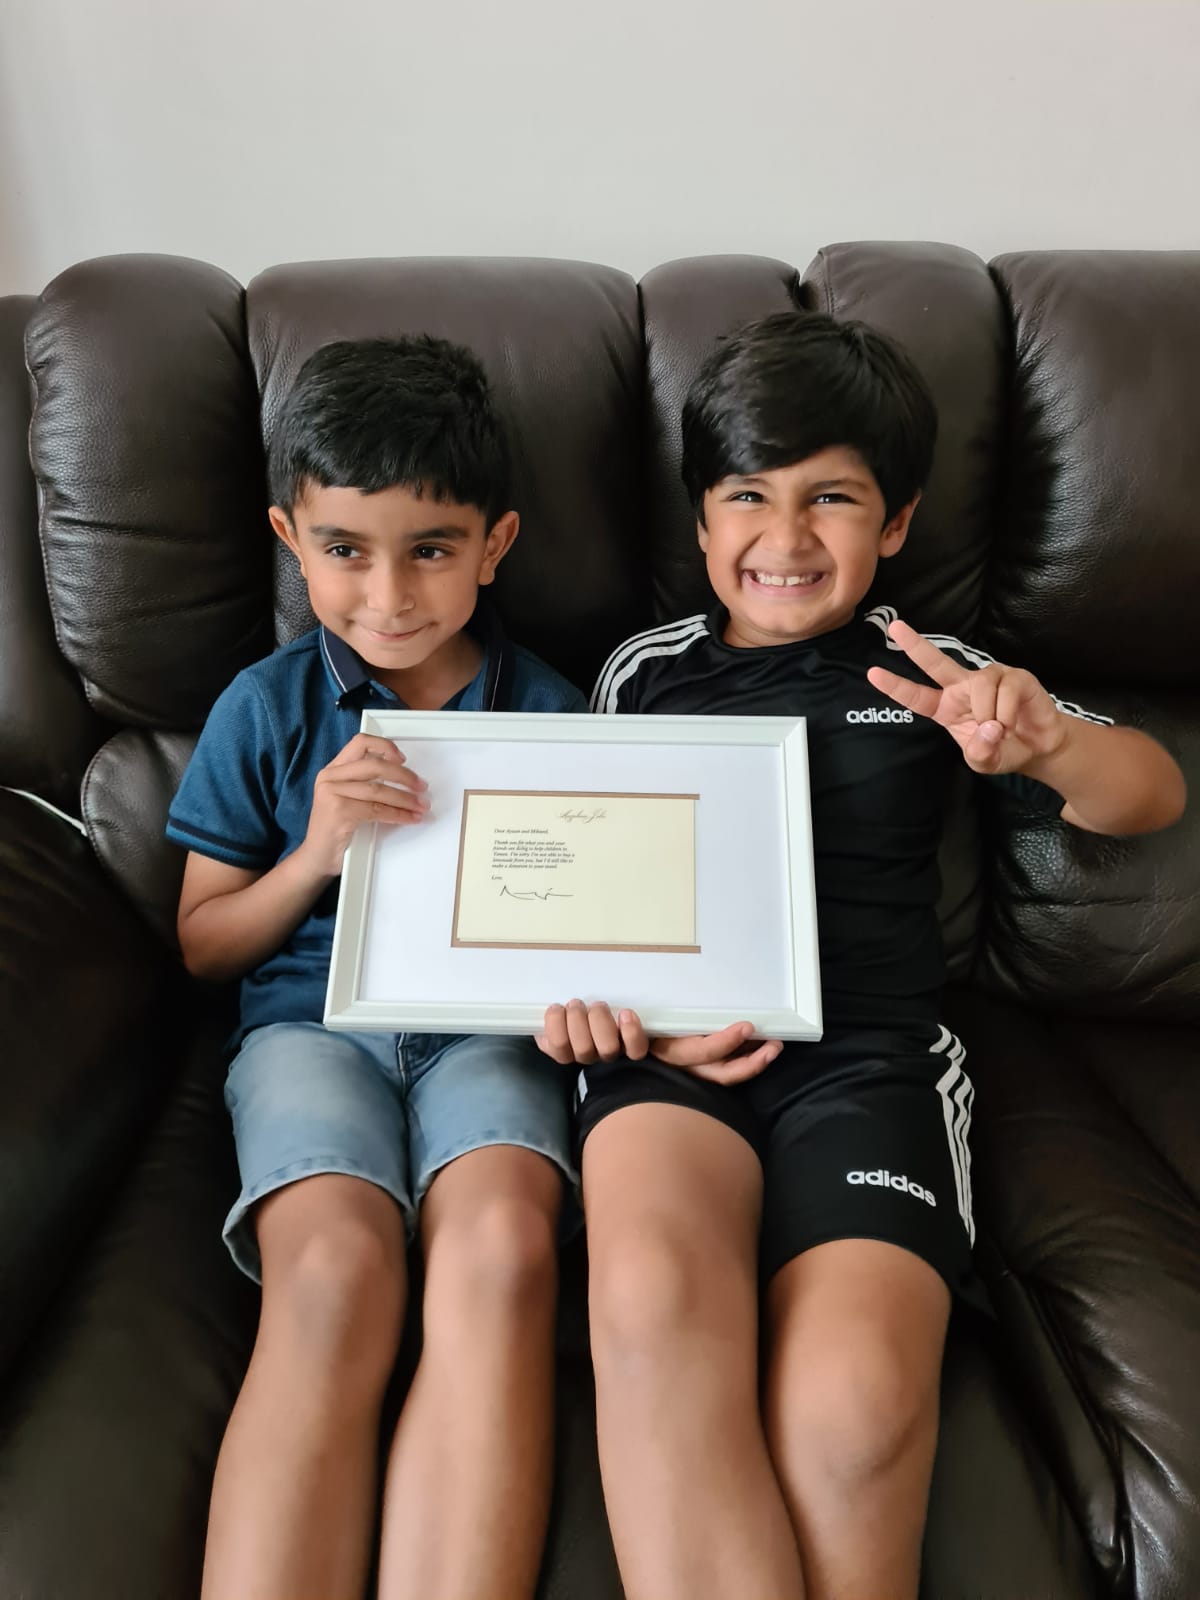 Mikaeel Ishaaq (left) and Ayaan Moosa have been raising money for causes with their lemonade